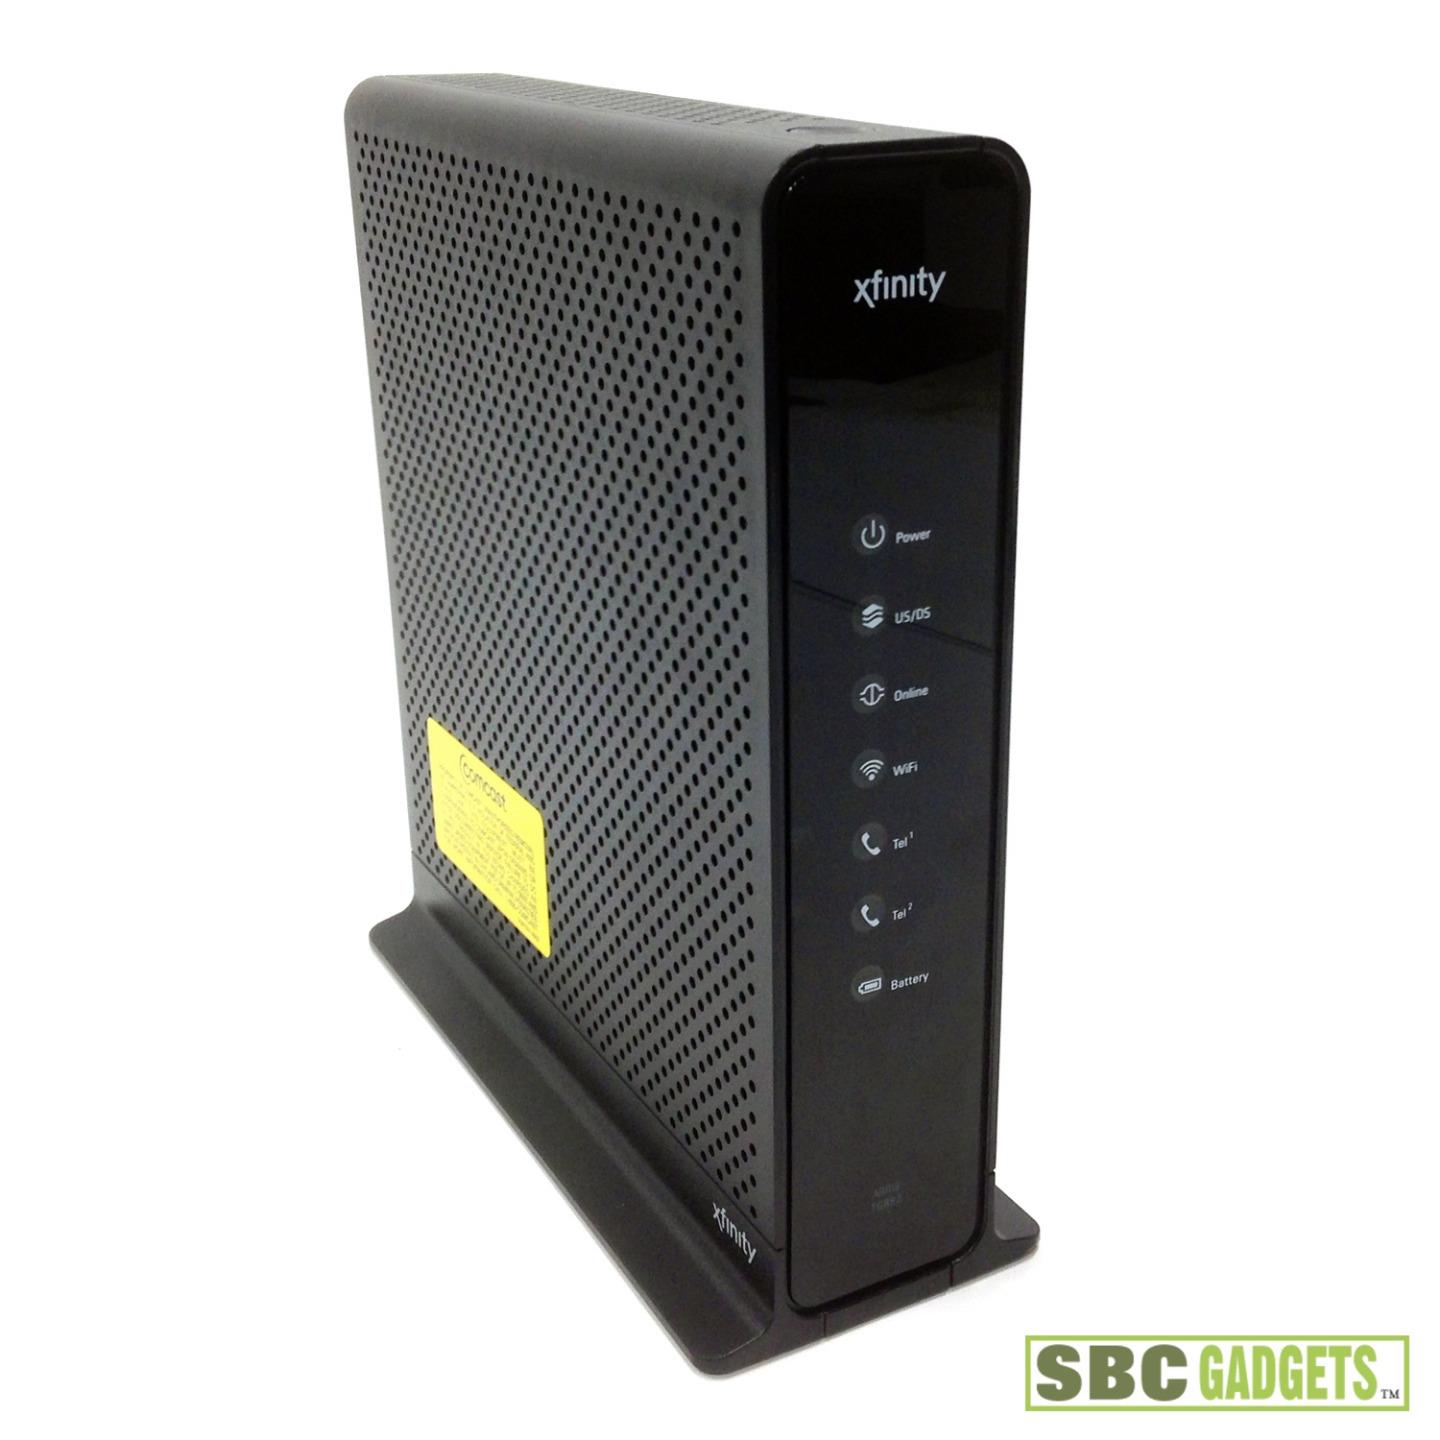 Xfinity Arris Touchstone Docsis 30 Cable Modem Wireless Router